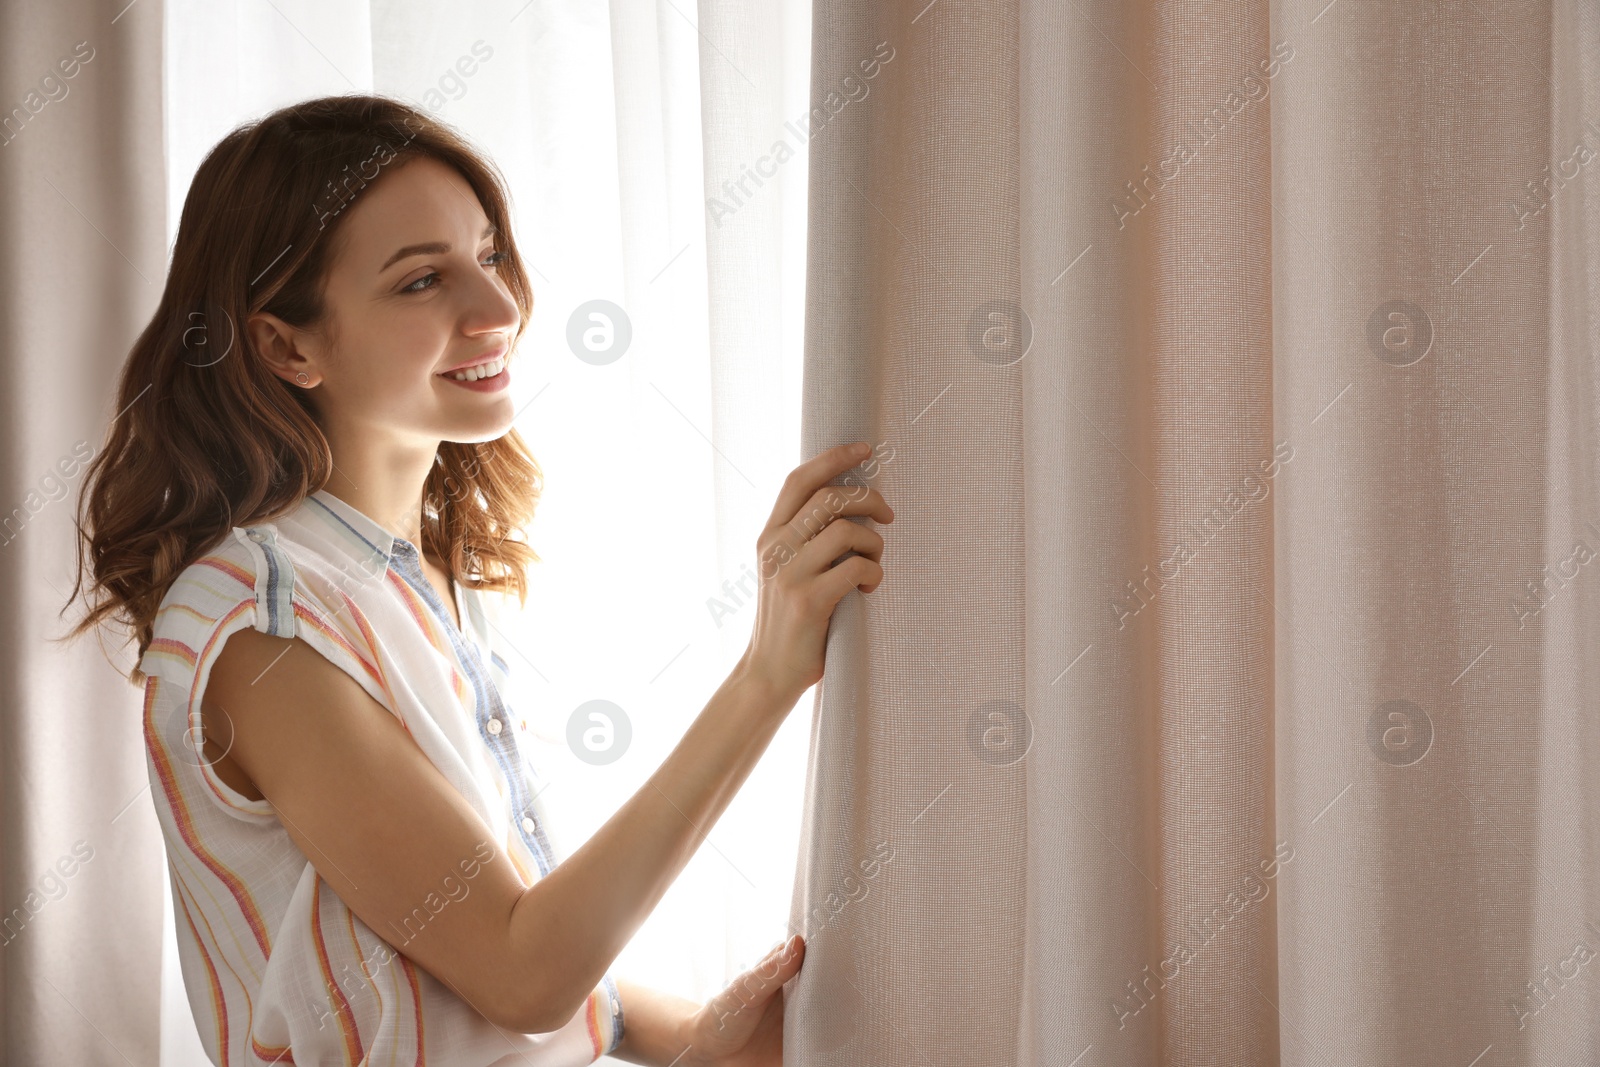 Photo of Woman opening window curtains at home in morning